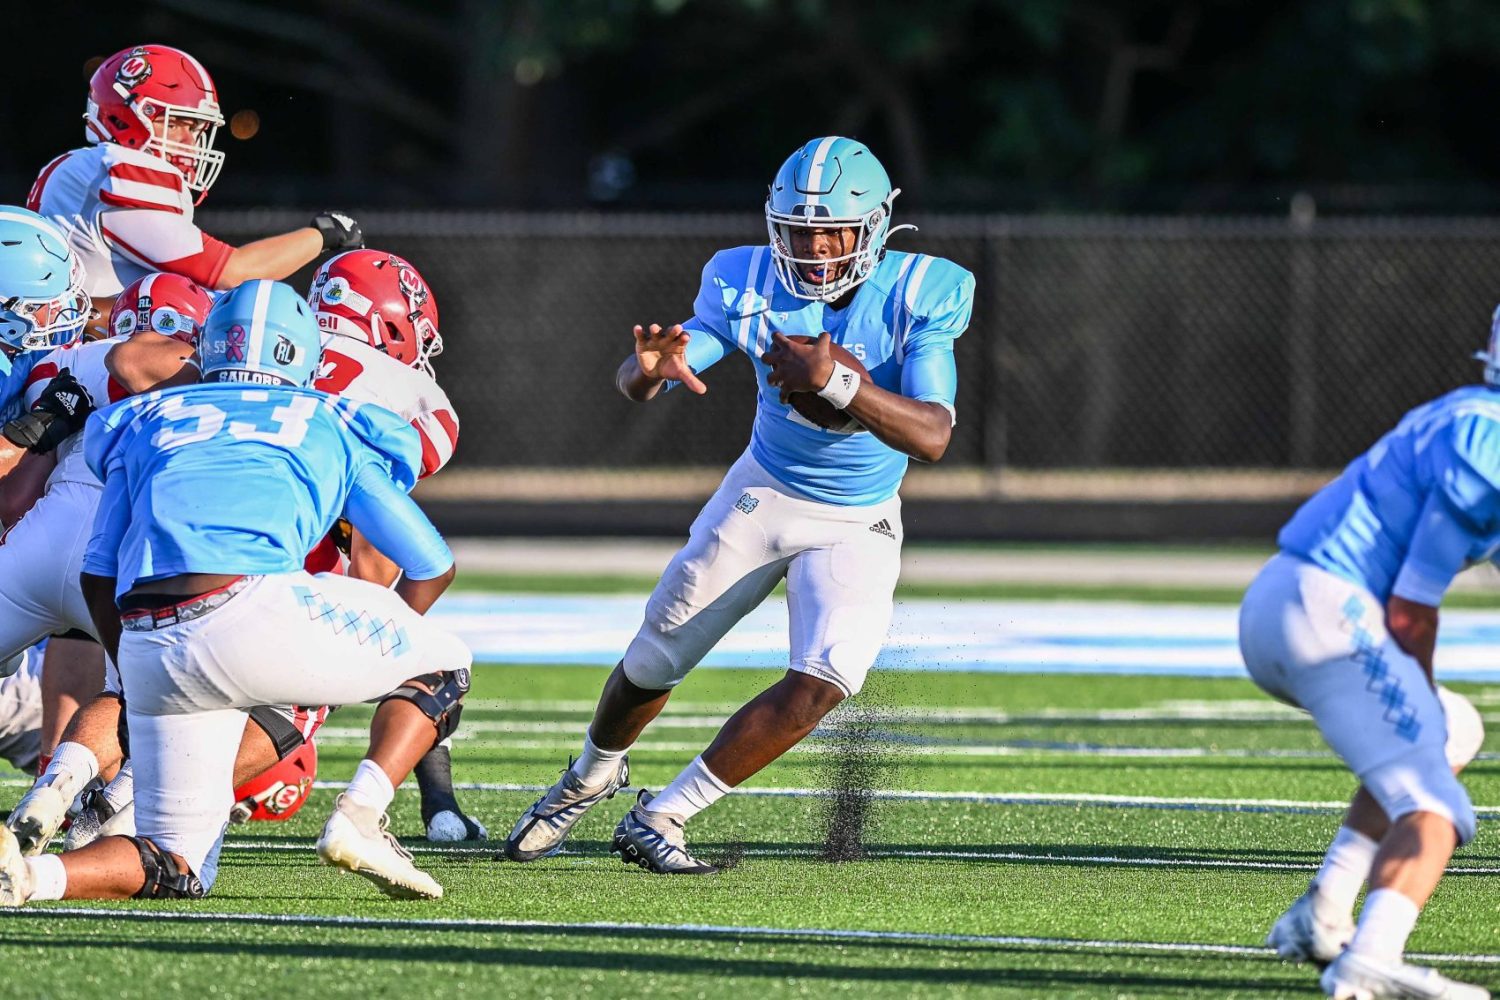 Mona Shores faces familiar foe in Forest Hills Central with district title on the line